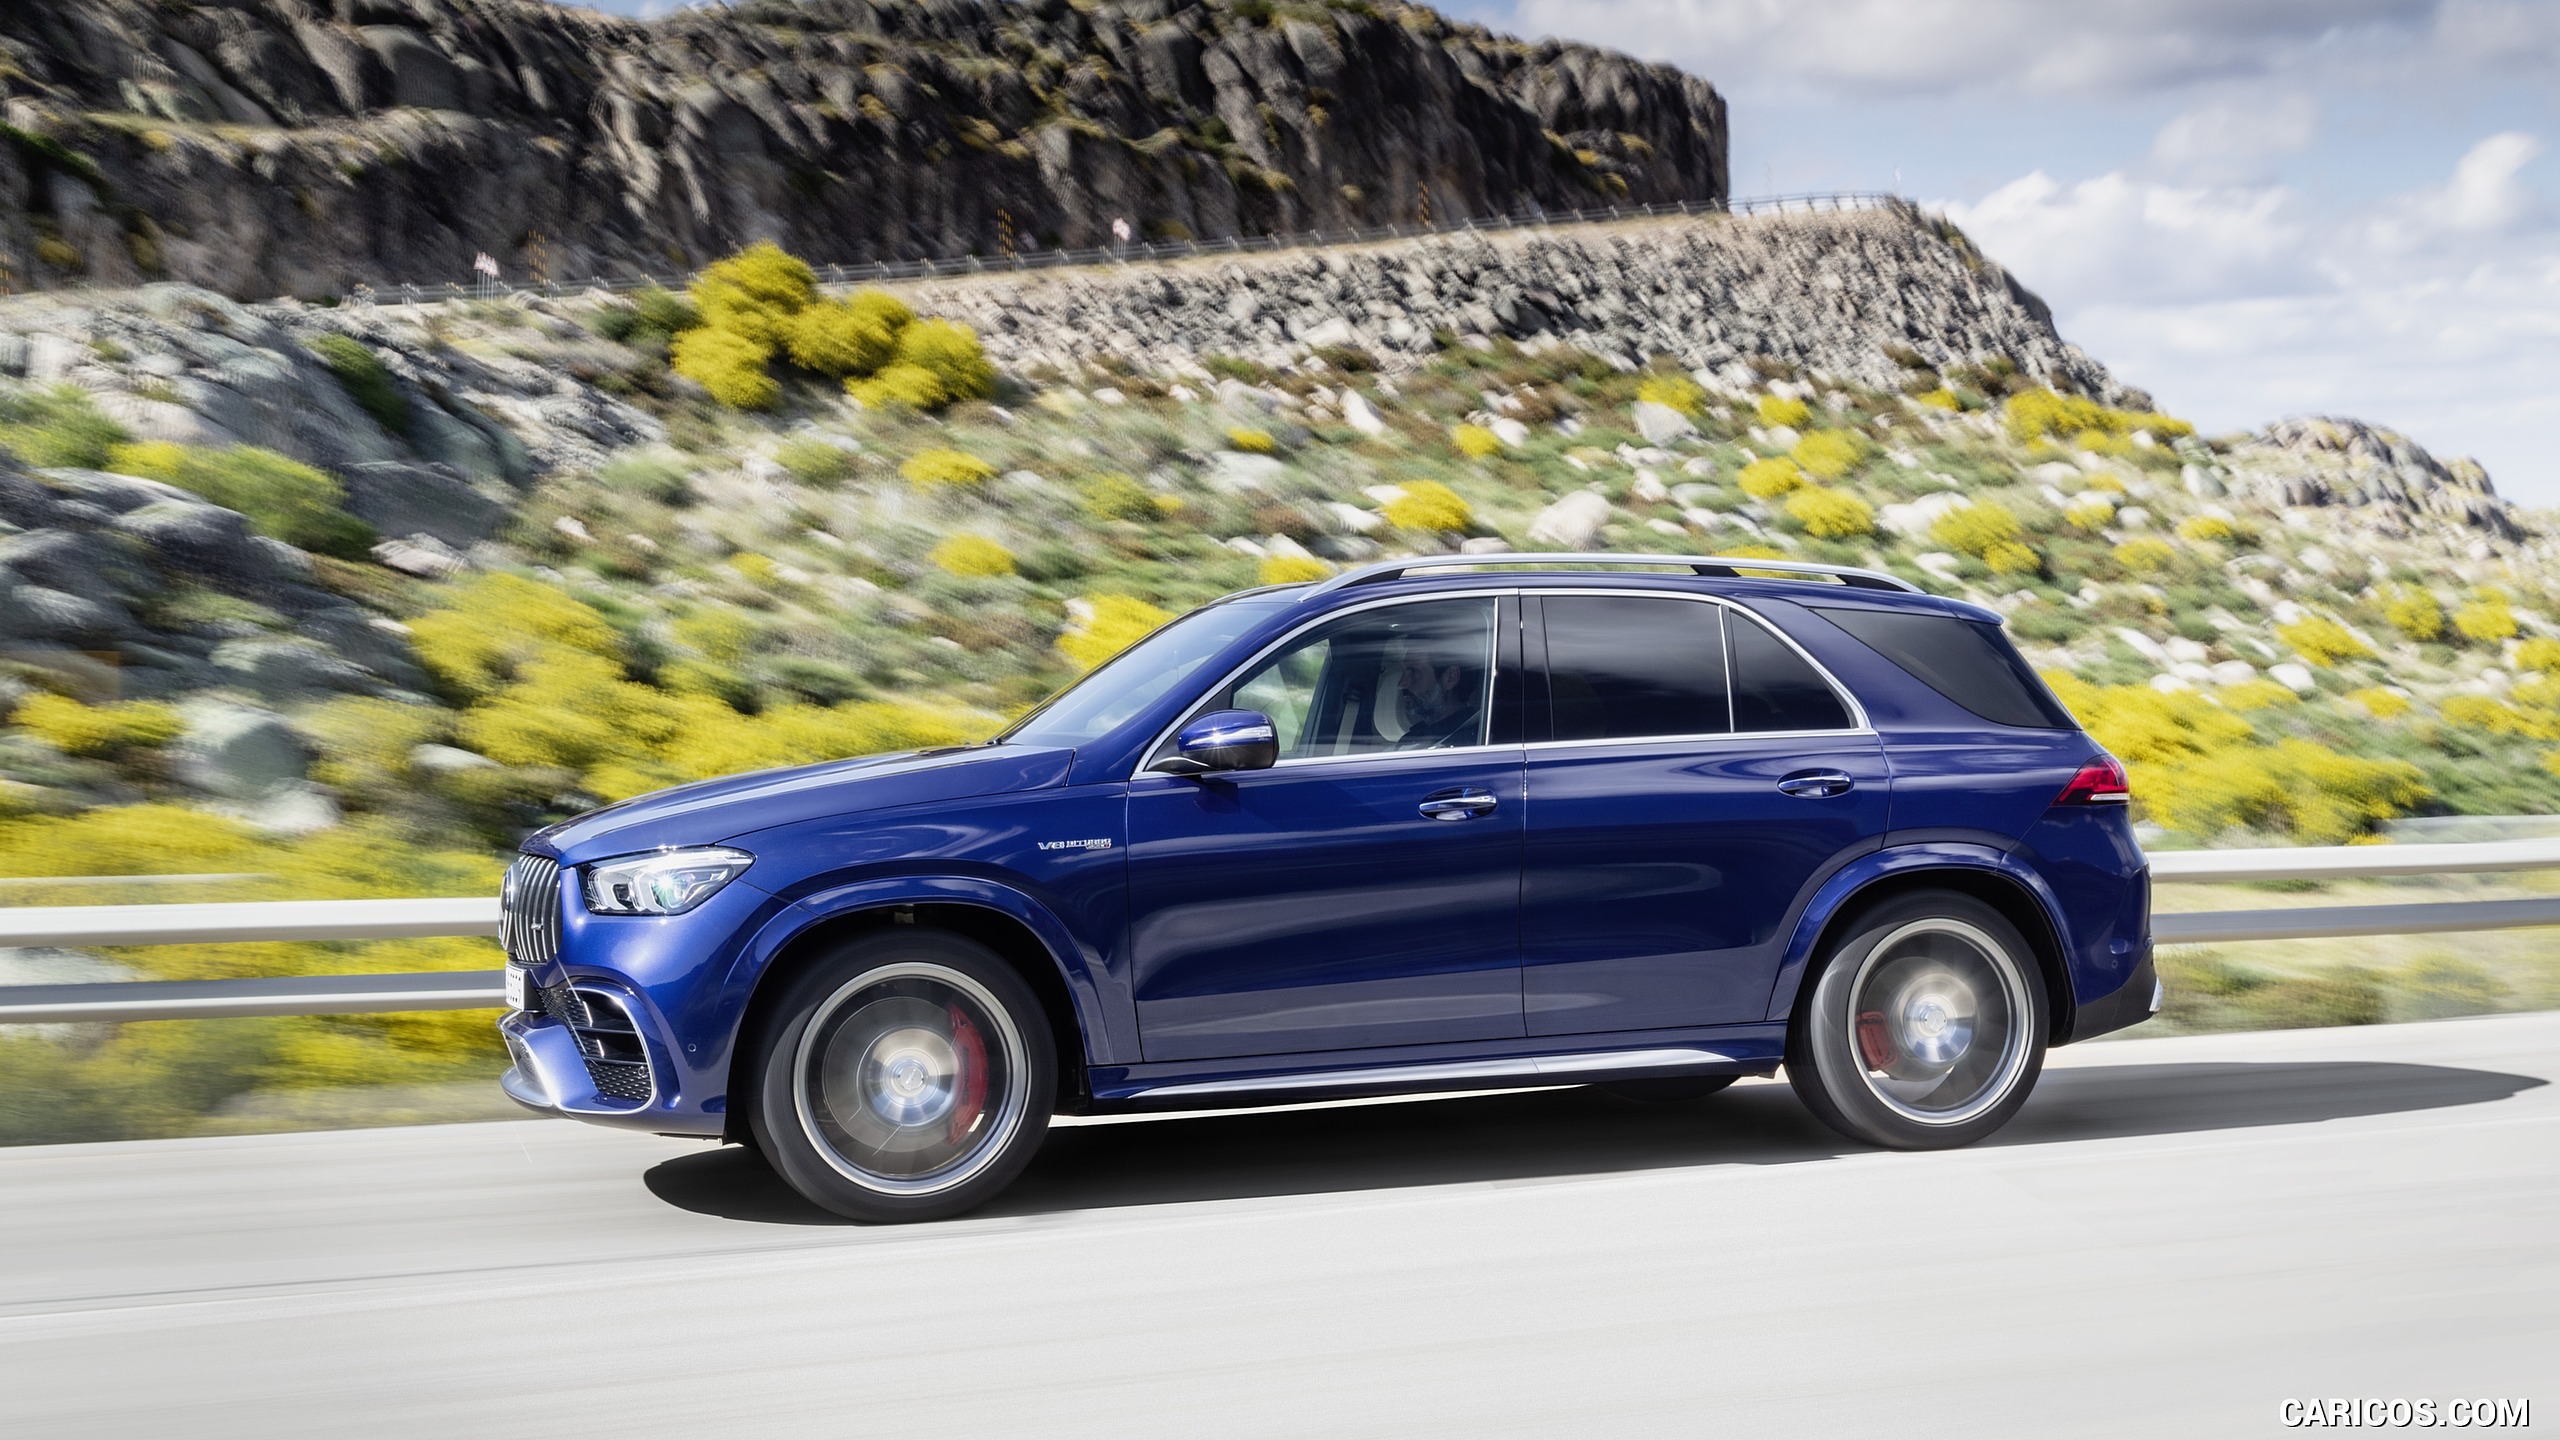 2021 Mercedes-AMG GLE 63 S 4MATIC - Side, #4 of 187